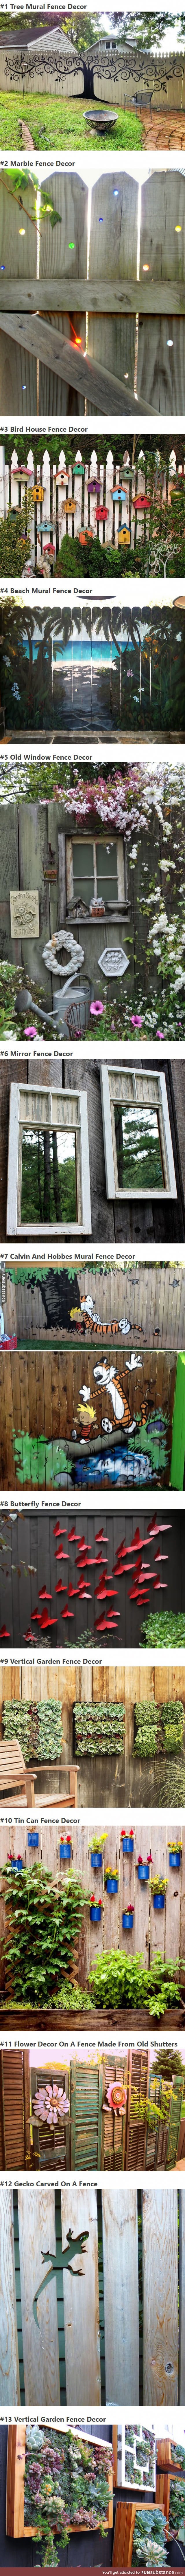 13 Creative People Who Took Their Backyard Fences To The Next Level